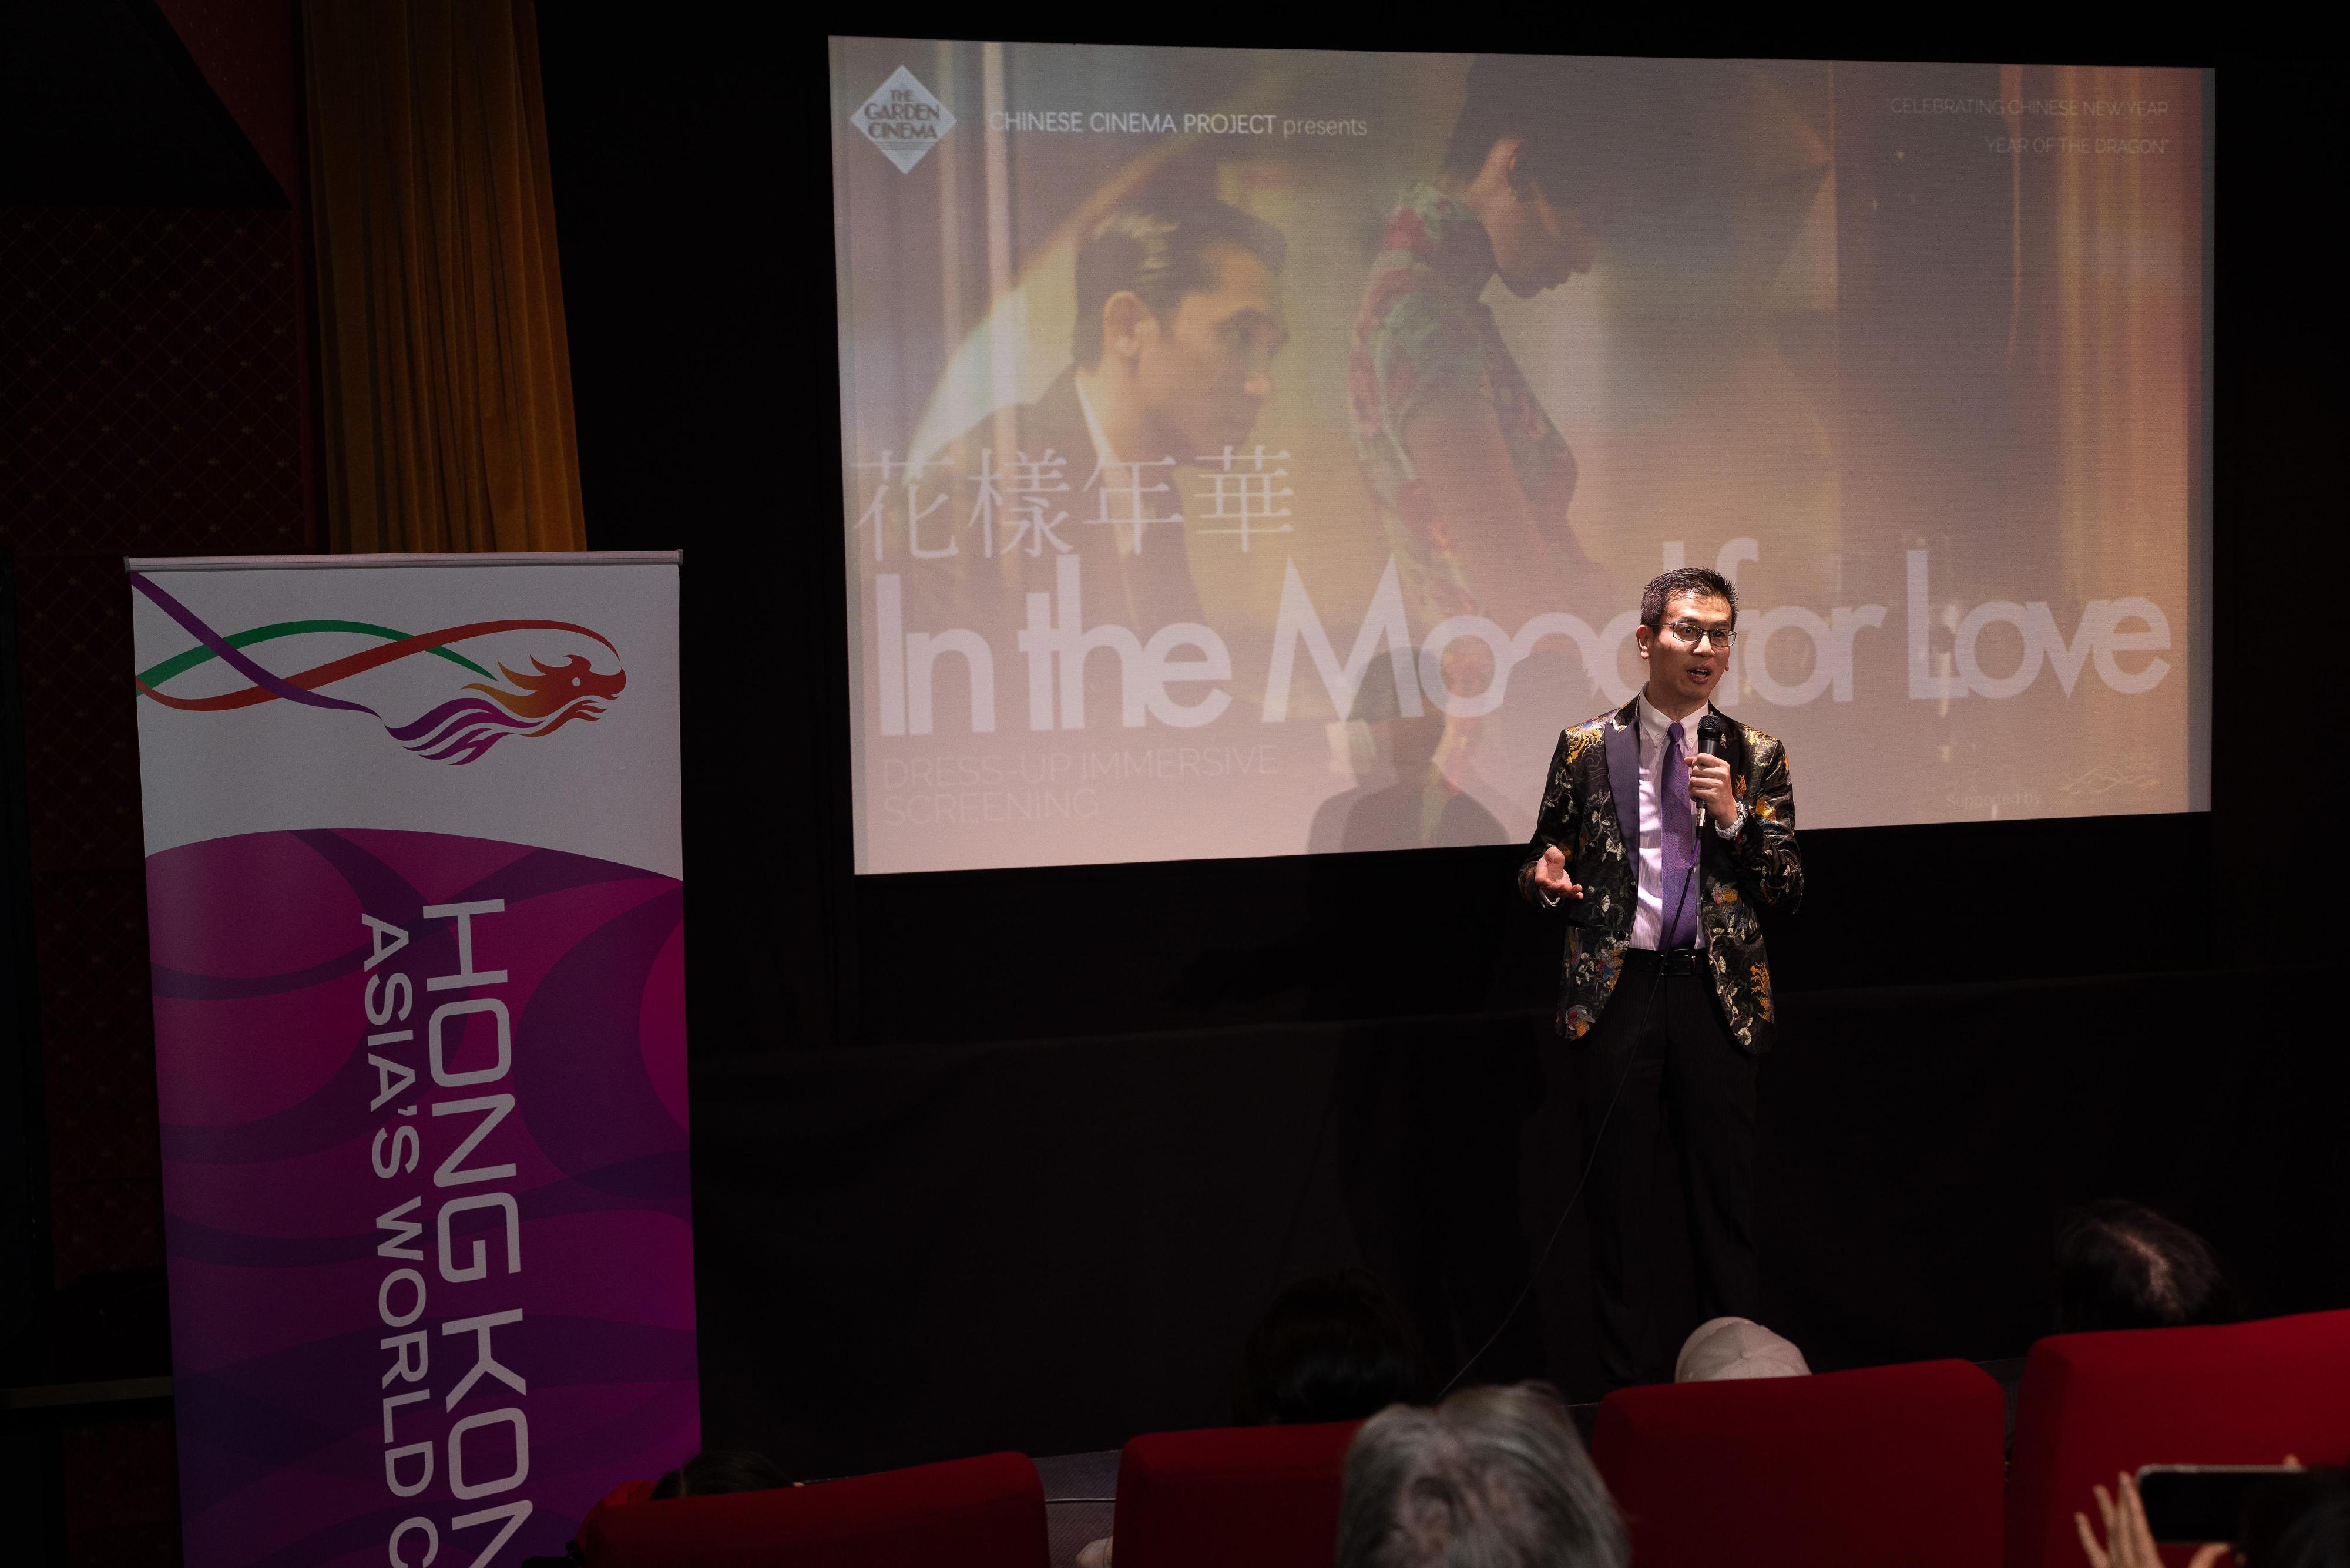 The Hong Kong Economic and Trade Office, London (London ETO) supported the Chinese Cinema Project in staging an immersive screening of "In the Mood for Love" in London, the United Kingdom, on February 3 (London time) to showcase Hong Kong’s unique culture. Photo shows the Director-General of London ETO, Mr Gilford Law, addressing the audience at the opening screening.